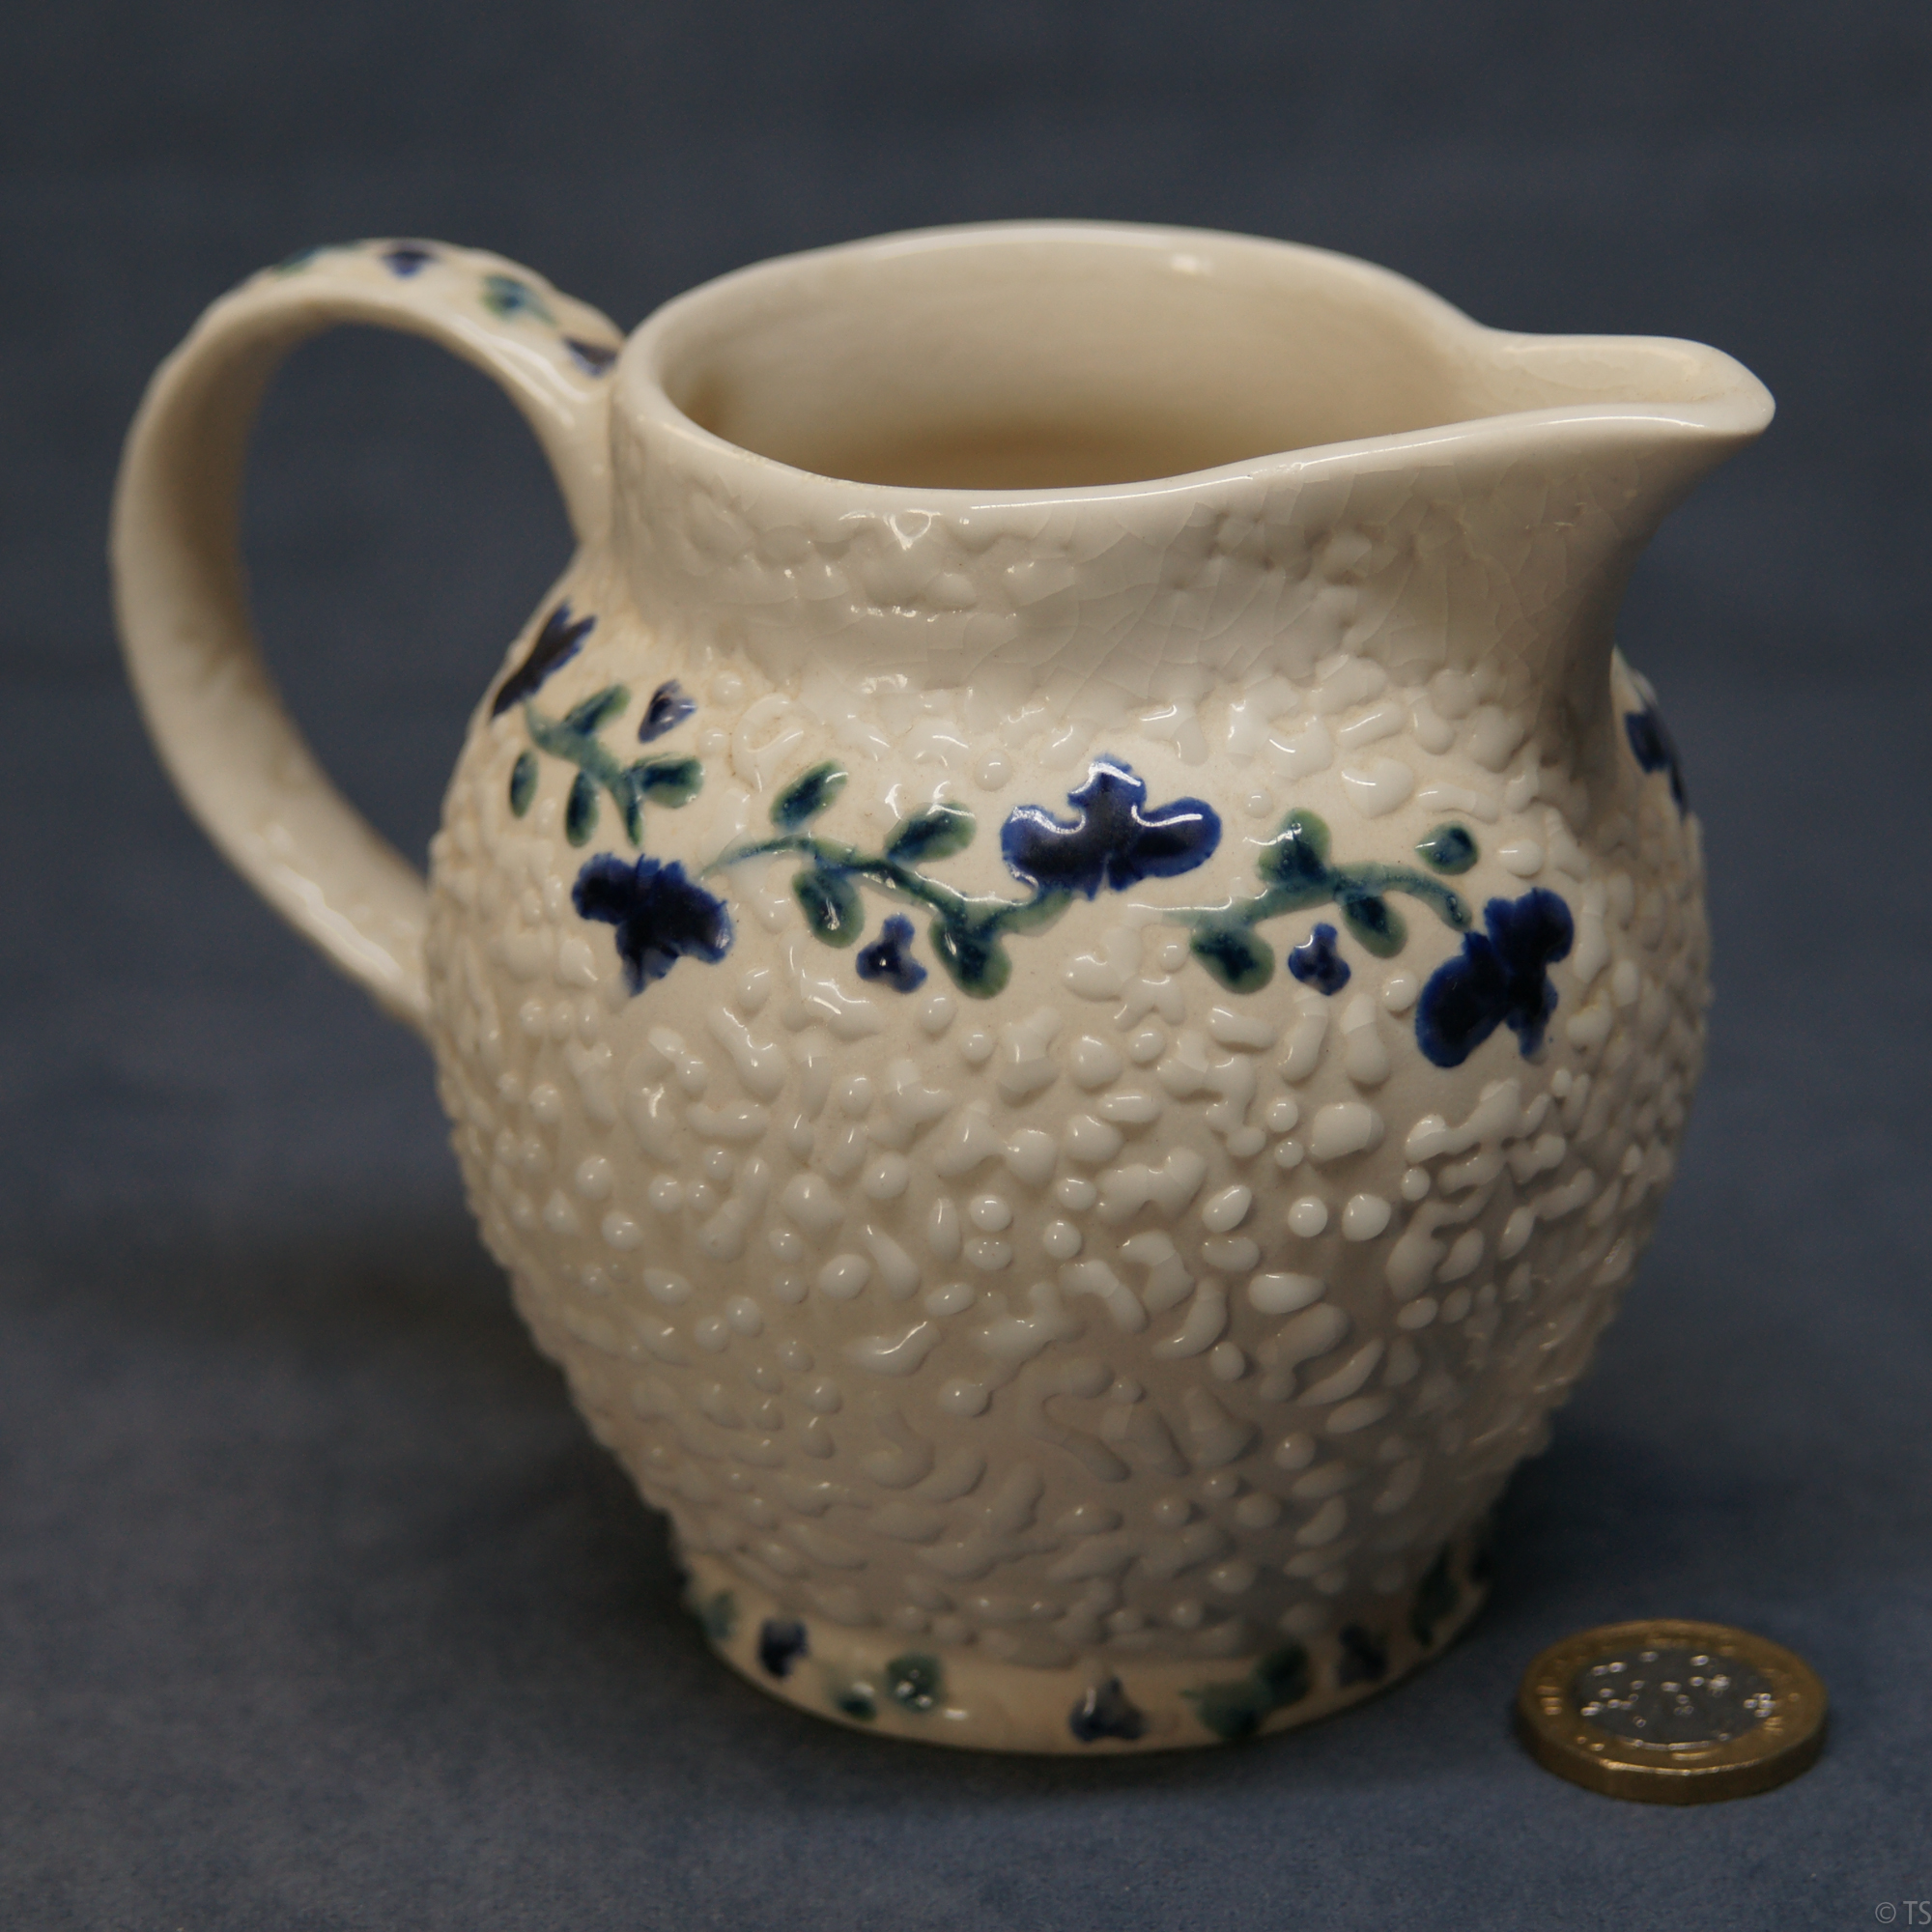 Jug Textured Blue and Green